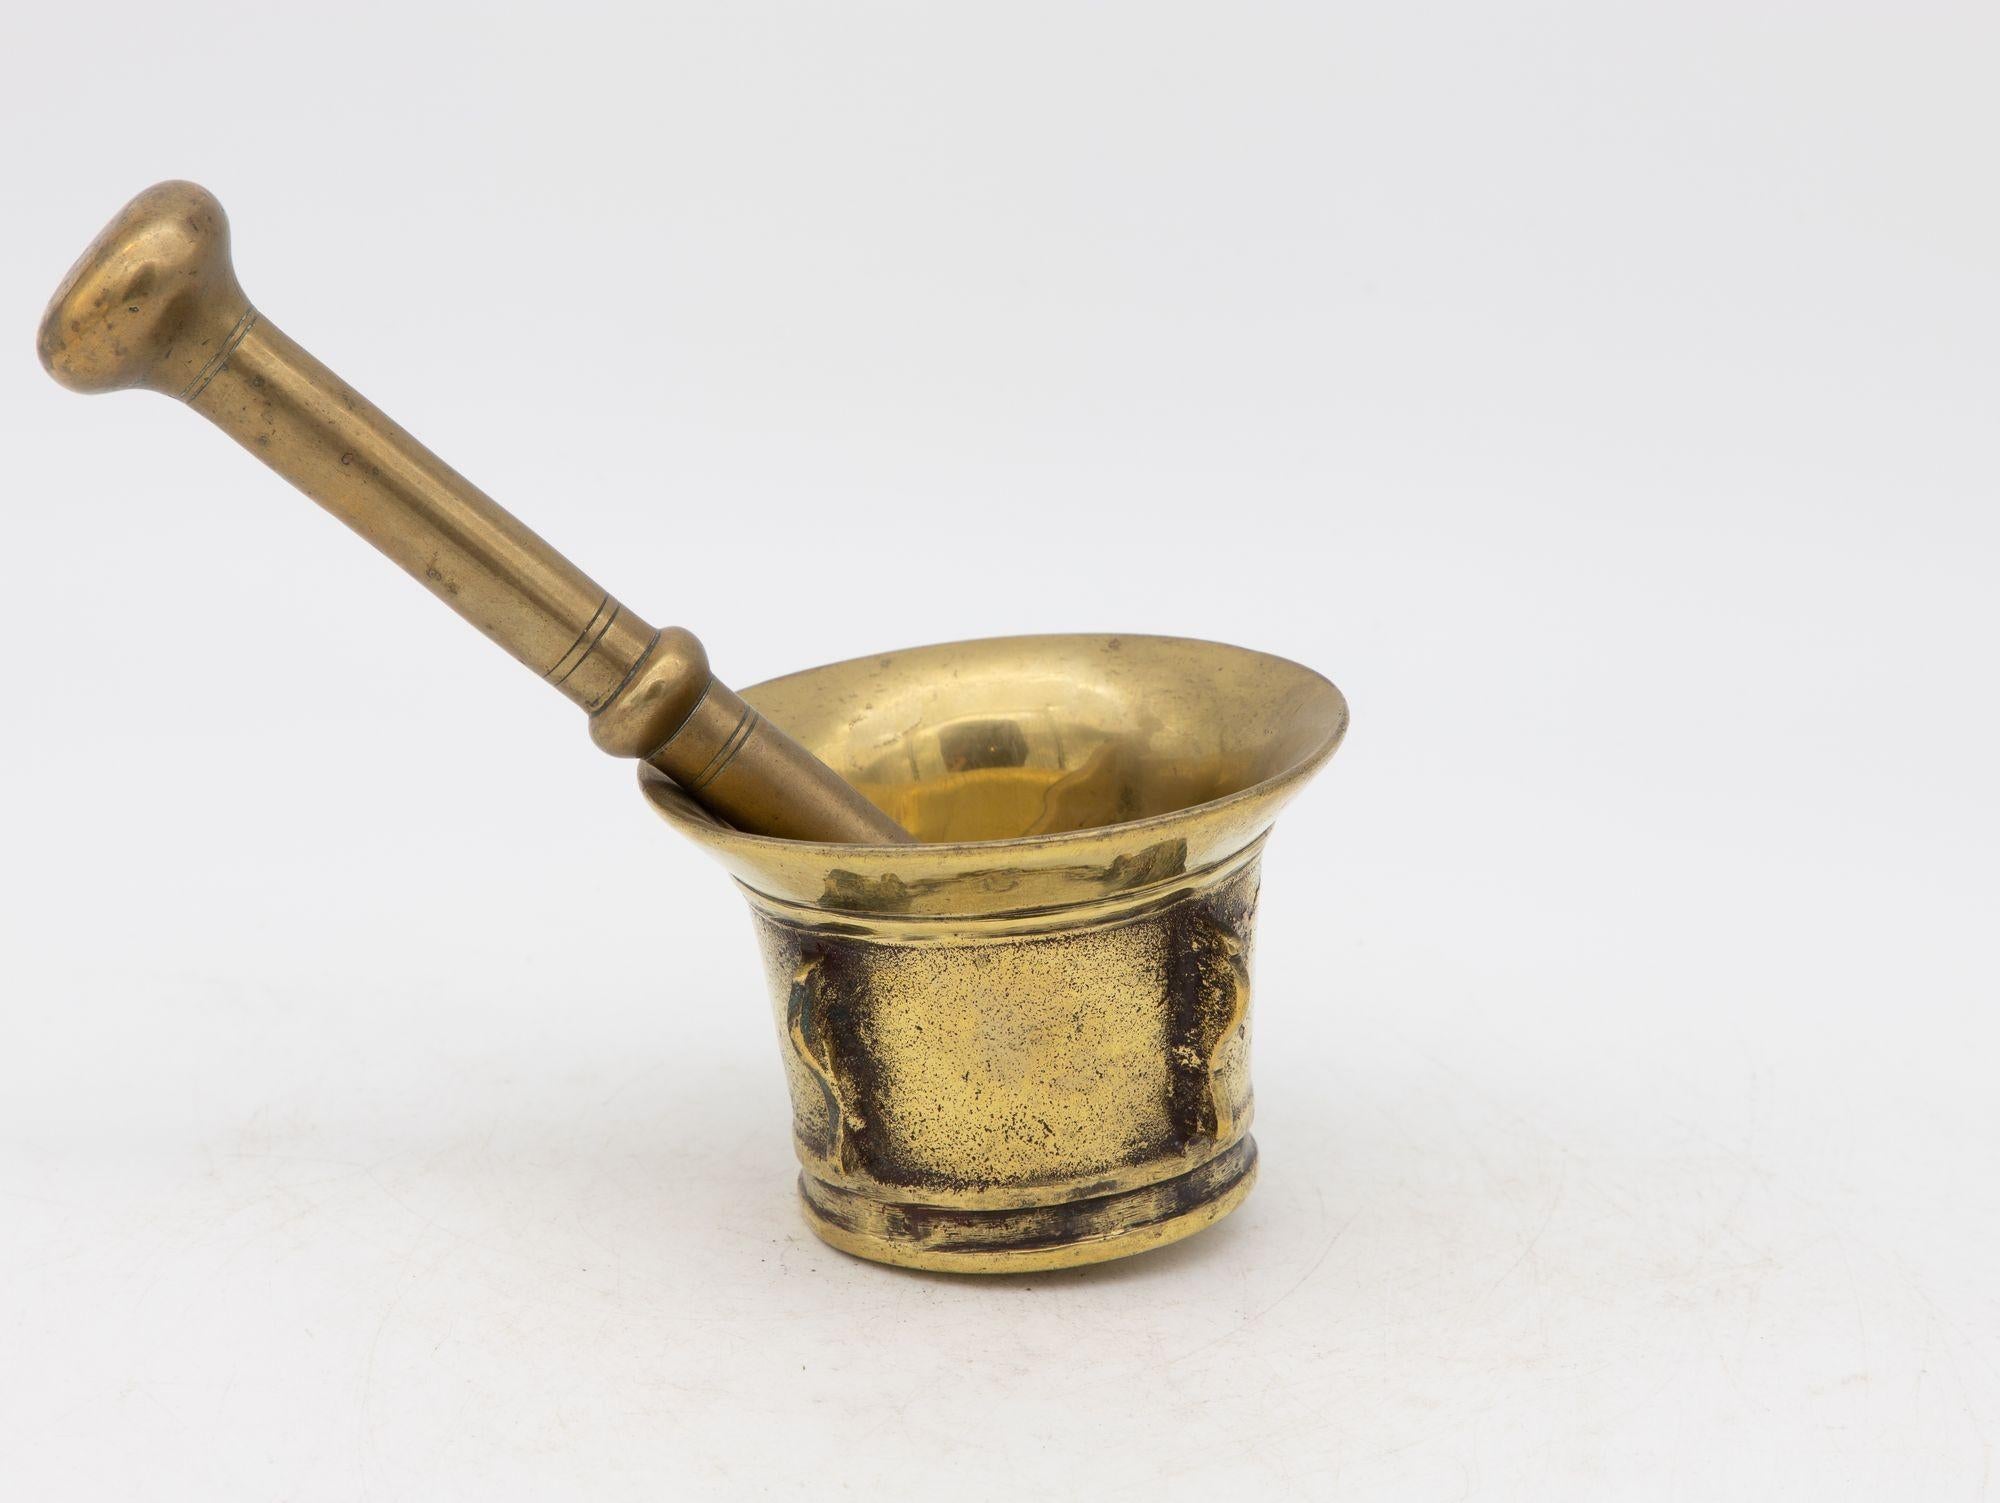 This early 20th-century mortar and pestle is made of brass with an honest patina. Both the mortar and pestle are traditional in style. The mortar has a classic bell-shaped body and the pestle has two flat ends. Brass mortar and pestles were used for